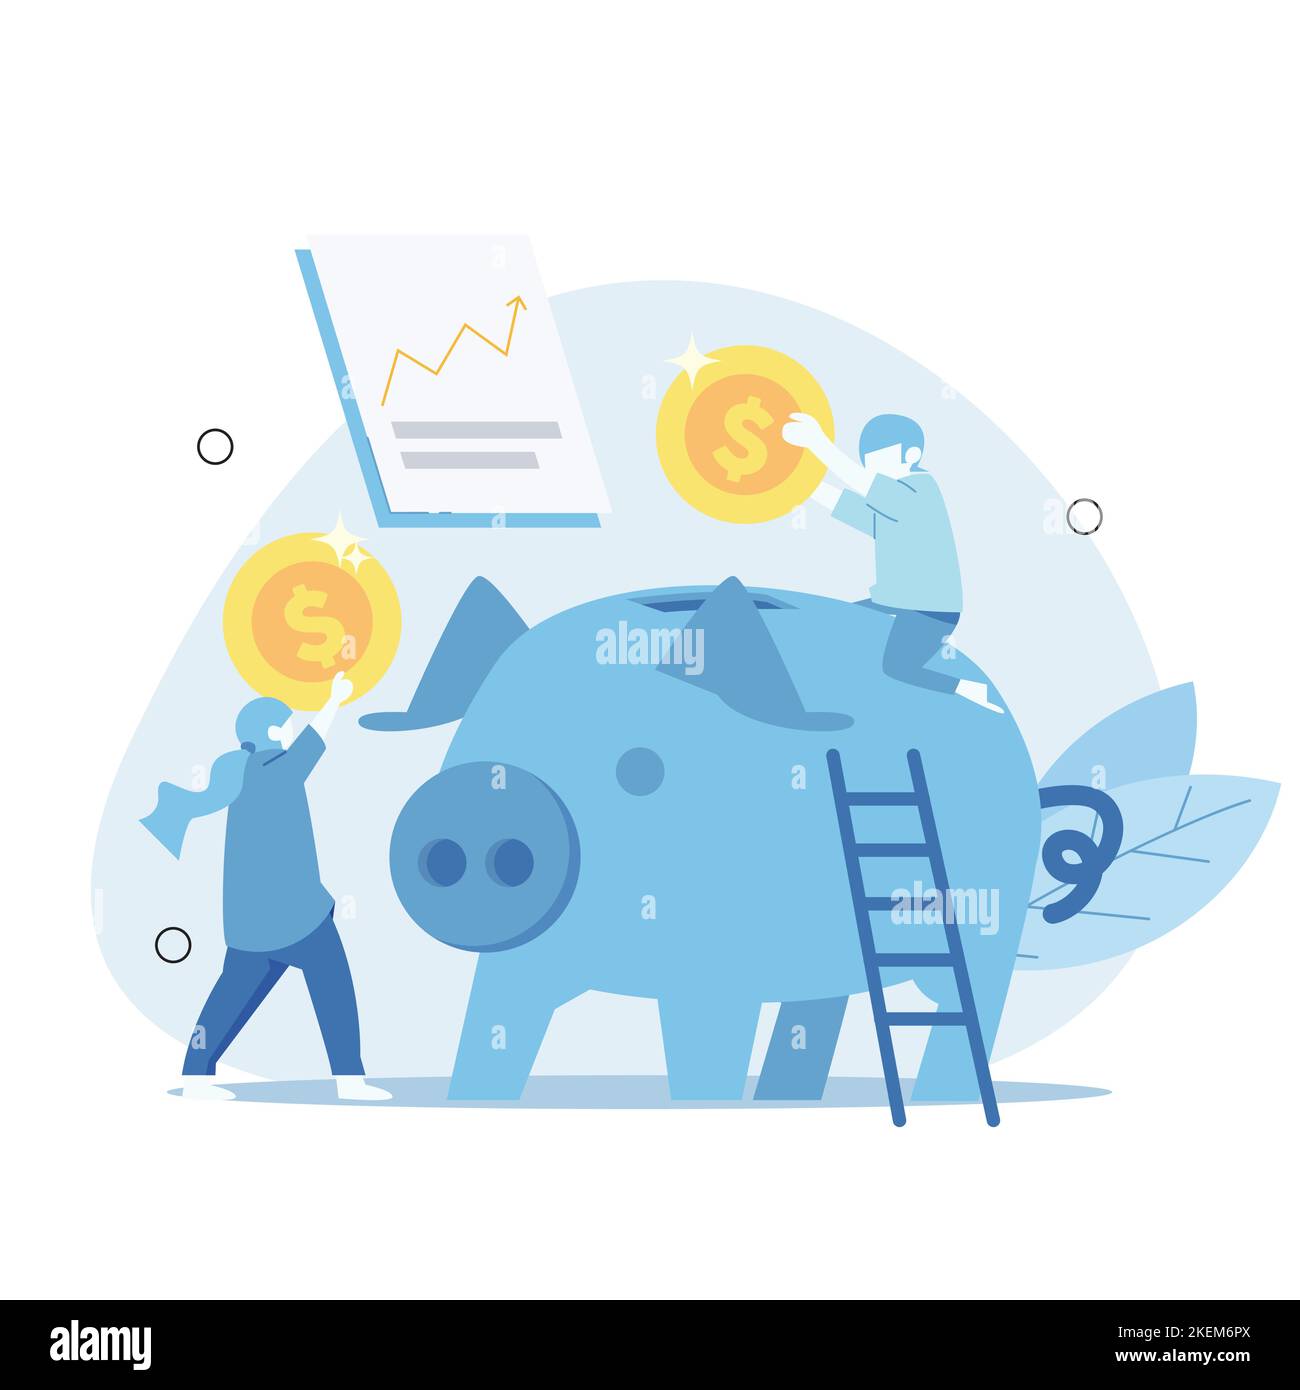 Family saving together. Two people who raise money together. The concept of saving, delaying desires, and setting priorities. flat cartoon vector illu Stock Vector